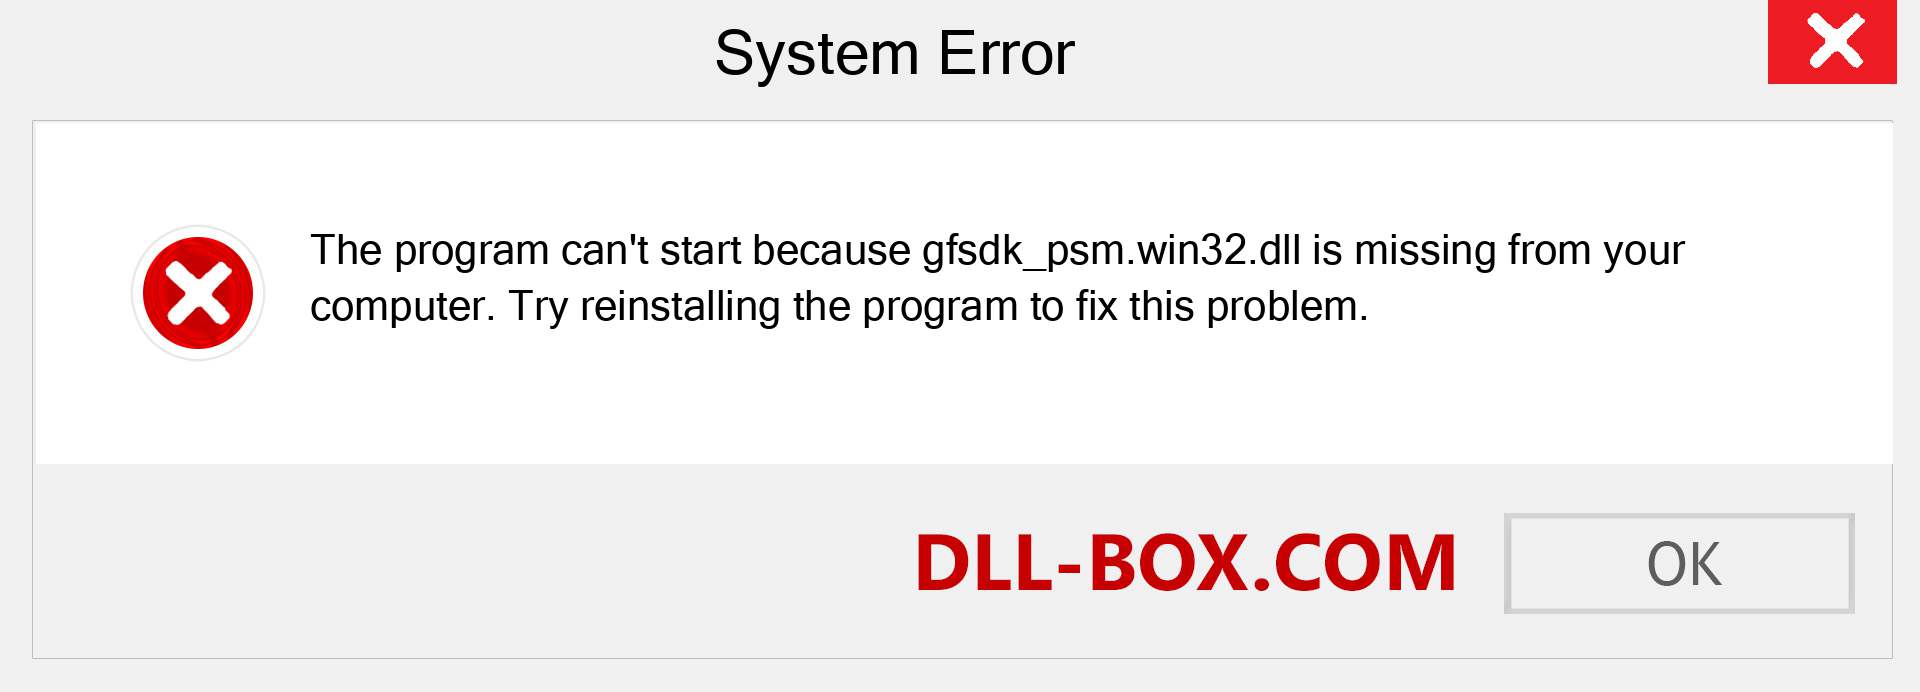  gfsdk_psm.win32.dll file is missing?. Download for Windows 7, 8, 10 - Fix  gfsdk_psm.win32 dll Missing Error on Windows, photos, images